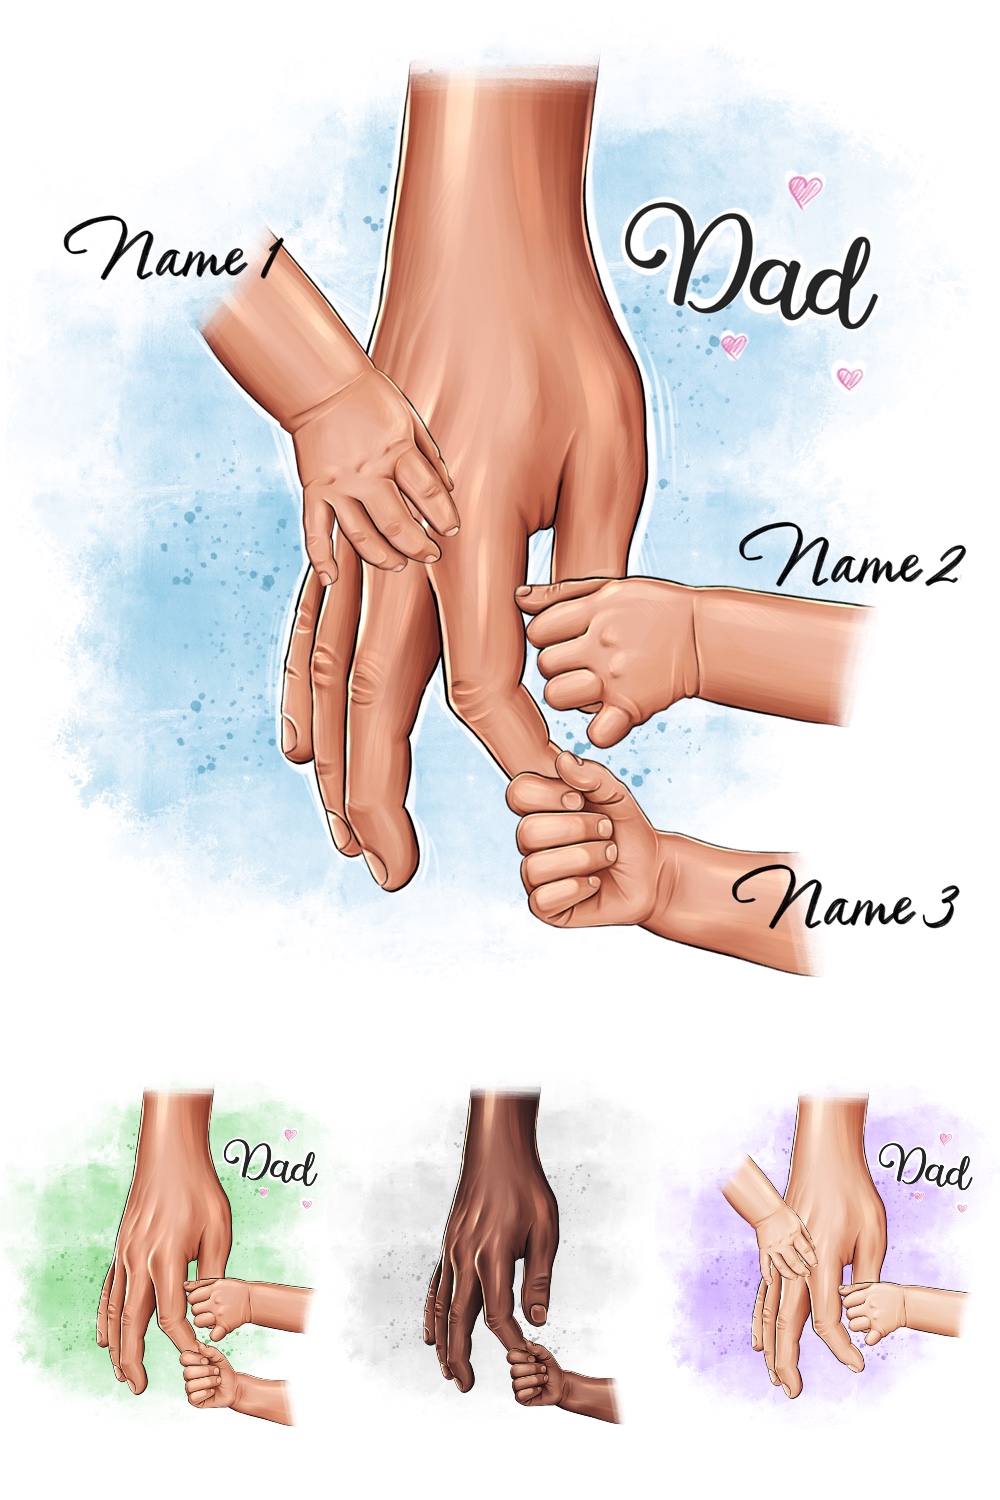 Family Clipart Parents And Kids Pinterest Image.